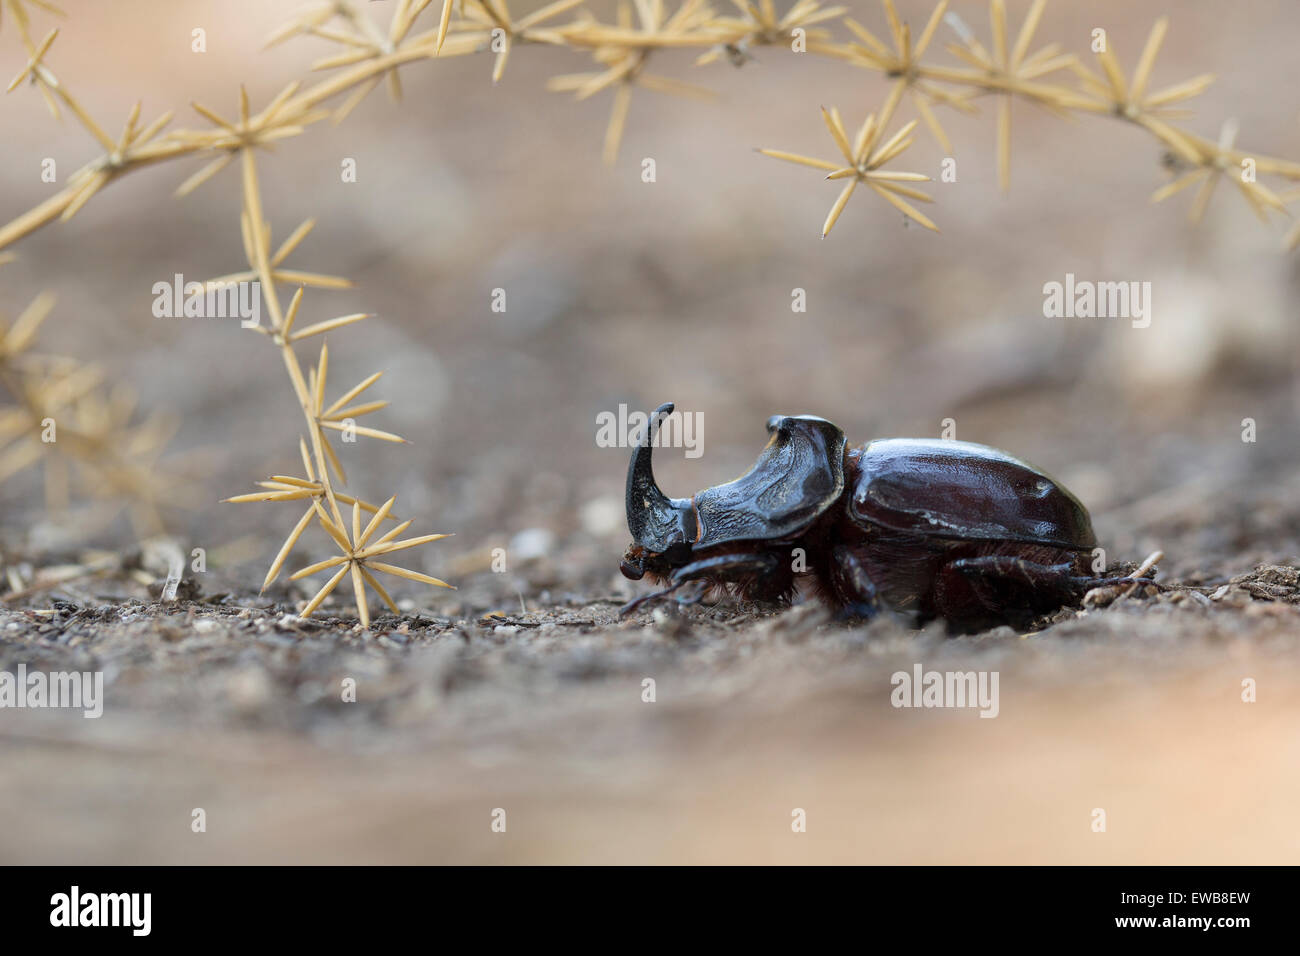 Horned or Spanish Dung beetle (Copris hispanus). Photographed in Israel in May Stock Photo